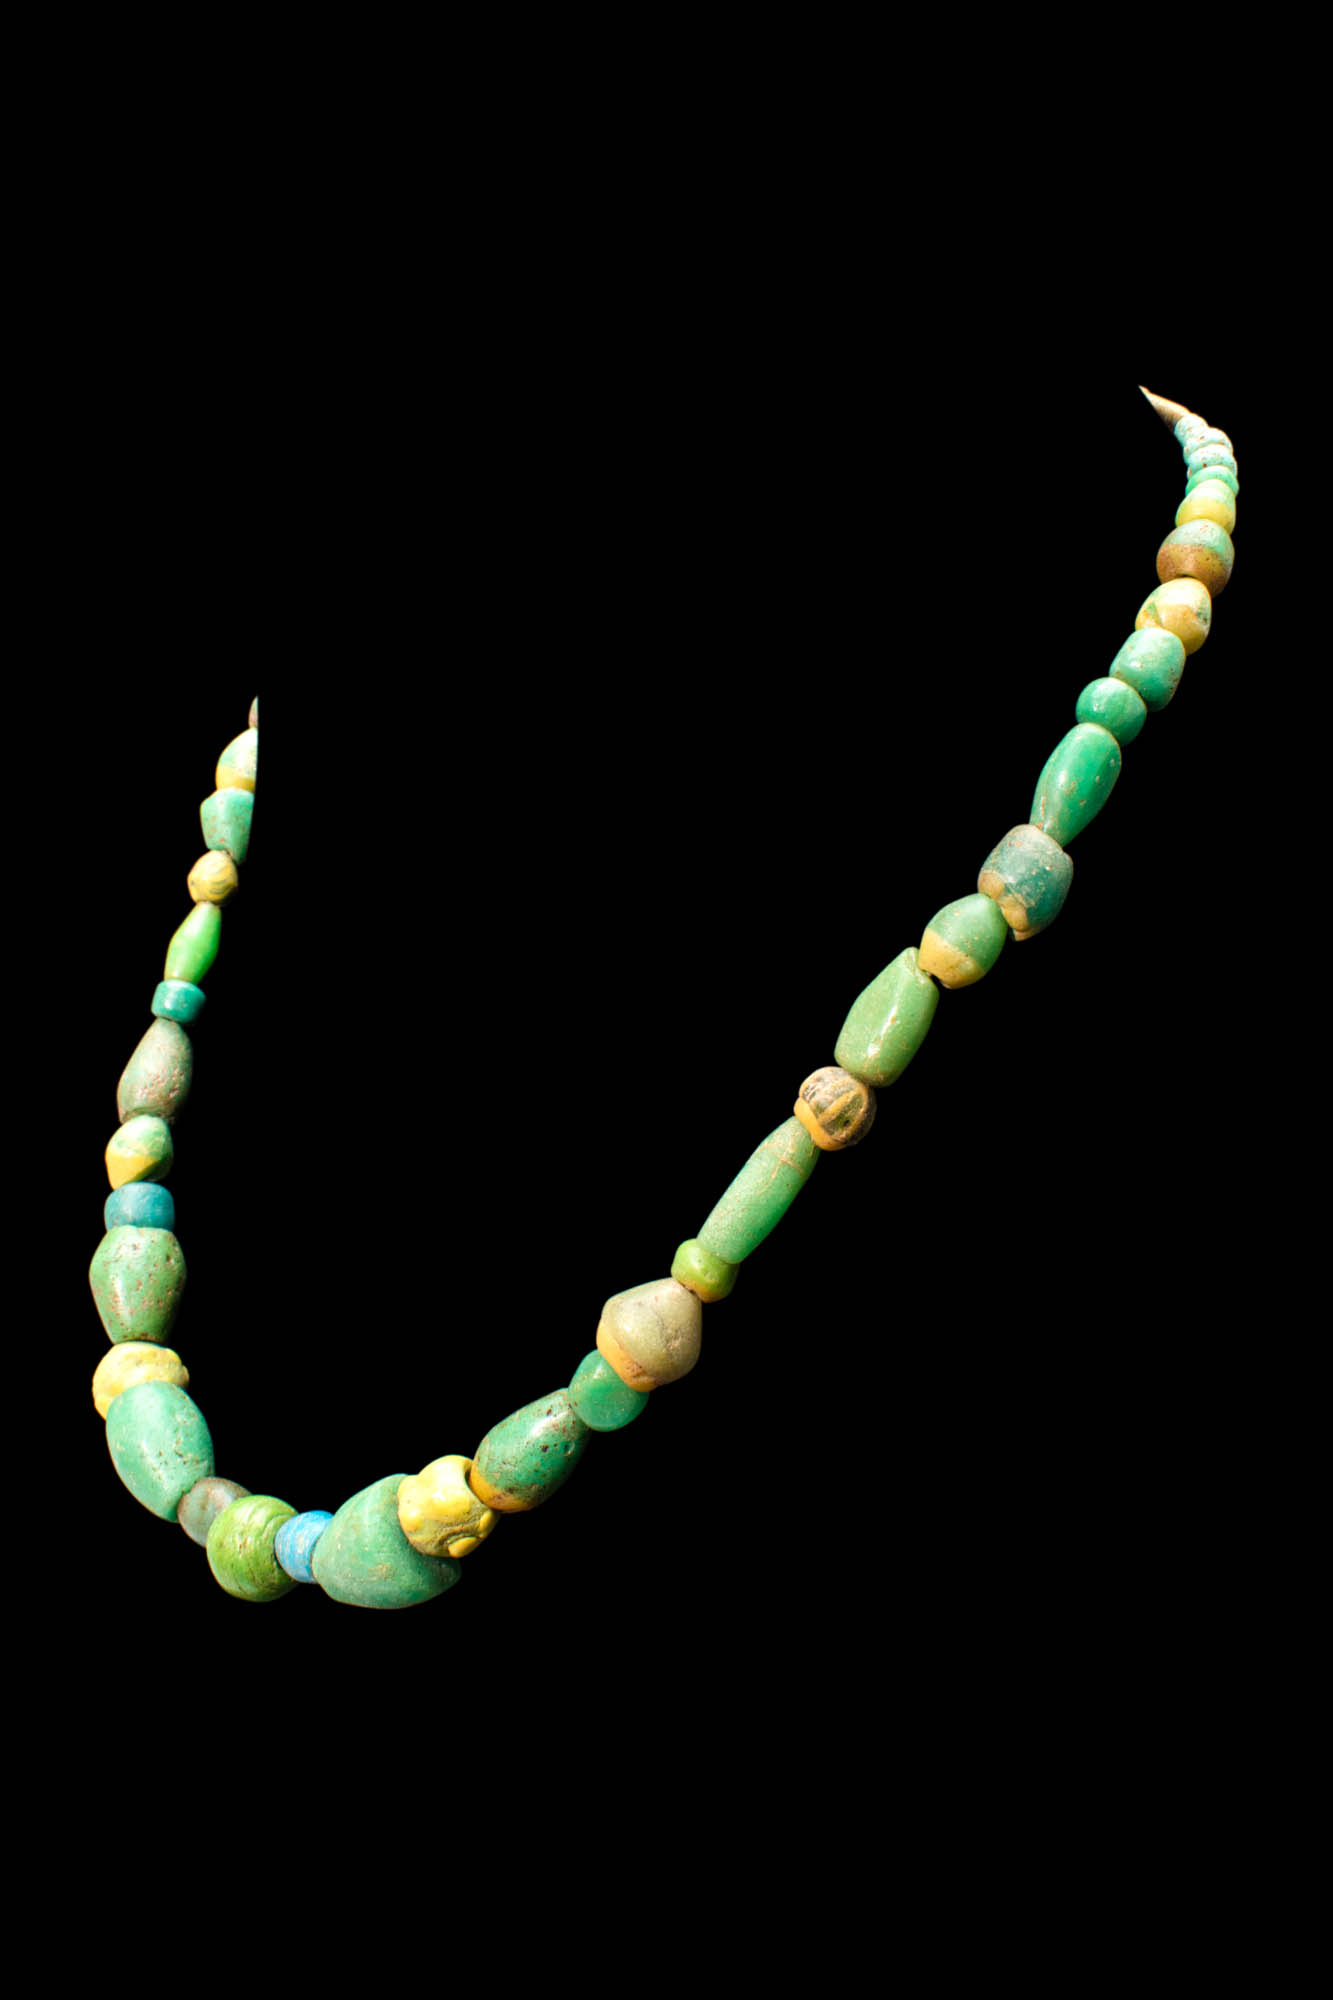 PHOENICIAN GLASS BEADS NECKLACE - Image 2 of 5